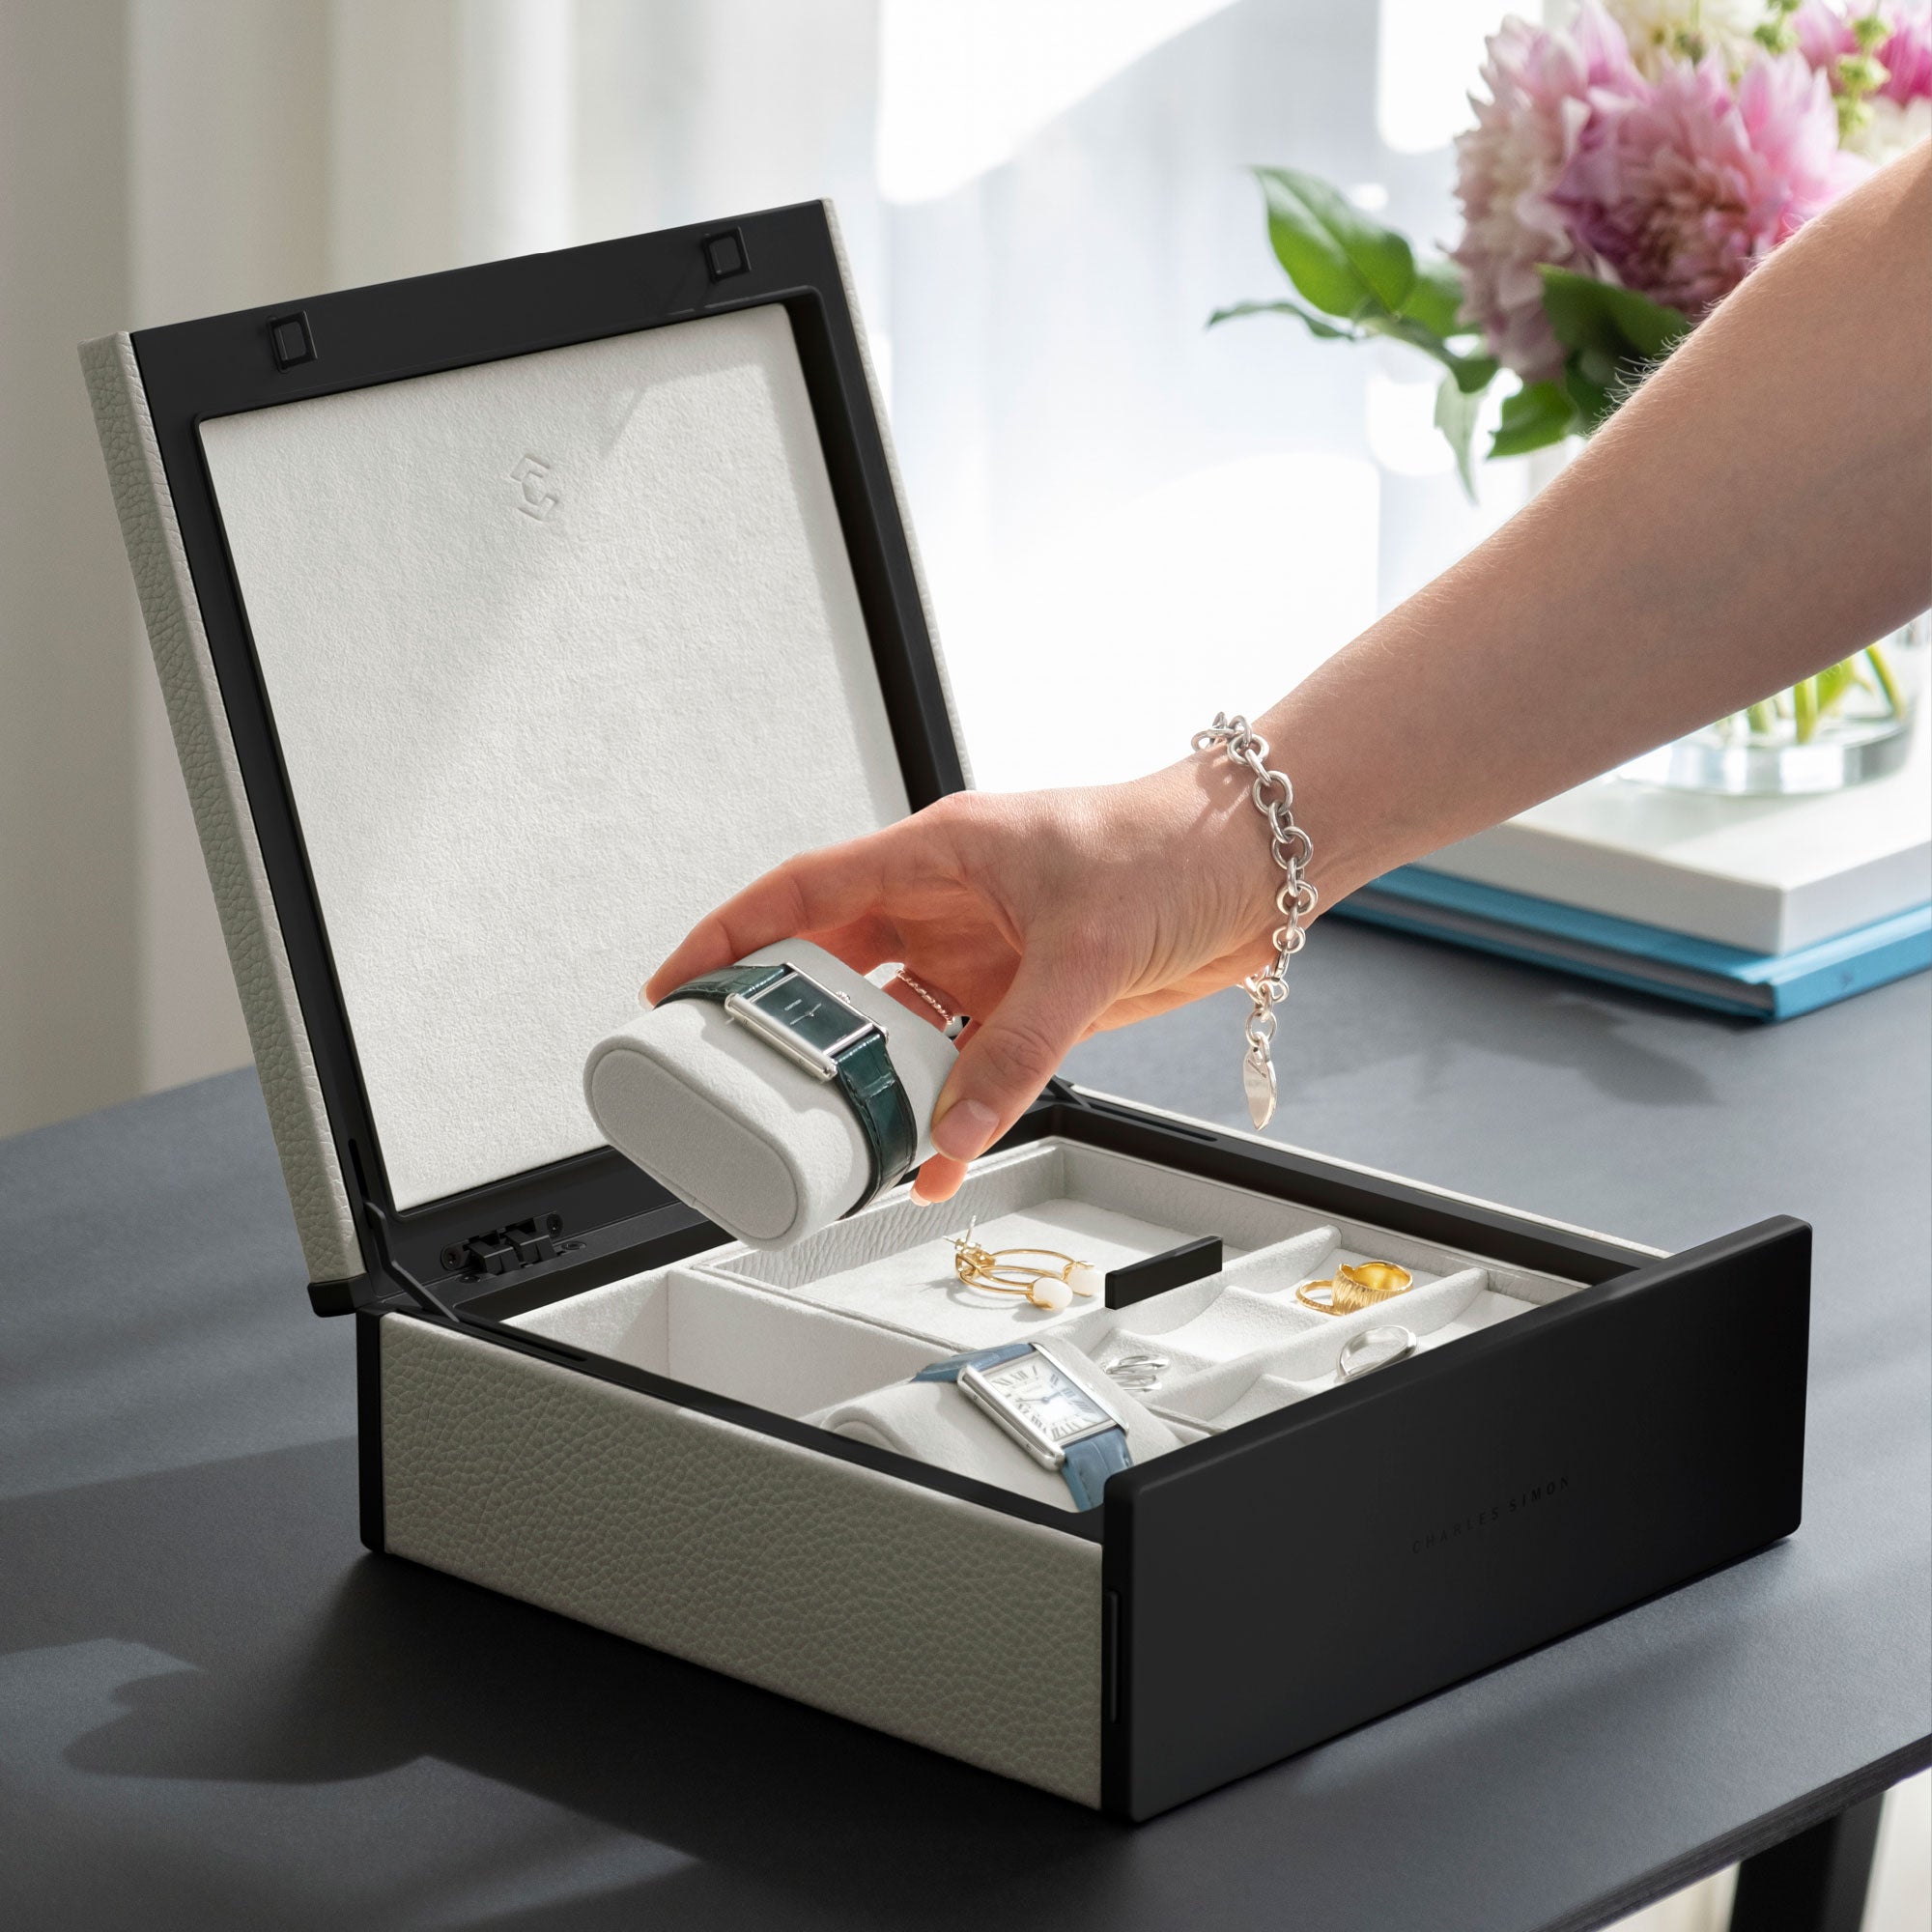 Lifestyle photo of Taylor 2 Watch and Jewelry box in white leather and alabaster interior. Woman is grabbing Cartier watch placed on alabaster watch cushion from the jewelry organizer. The luxury box is storing 2 watches in total as well as a collection of fine jewelry, including earrings and rings.